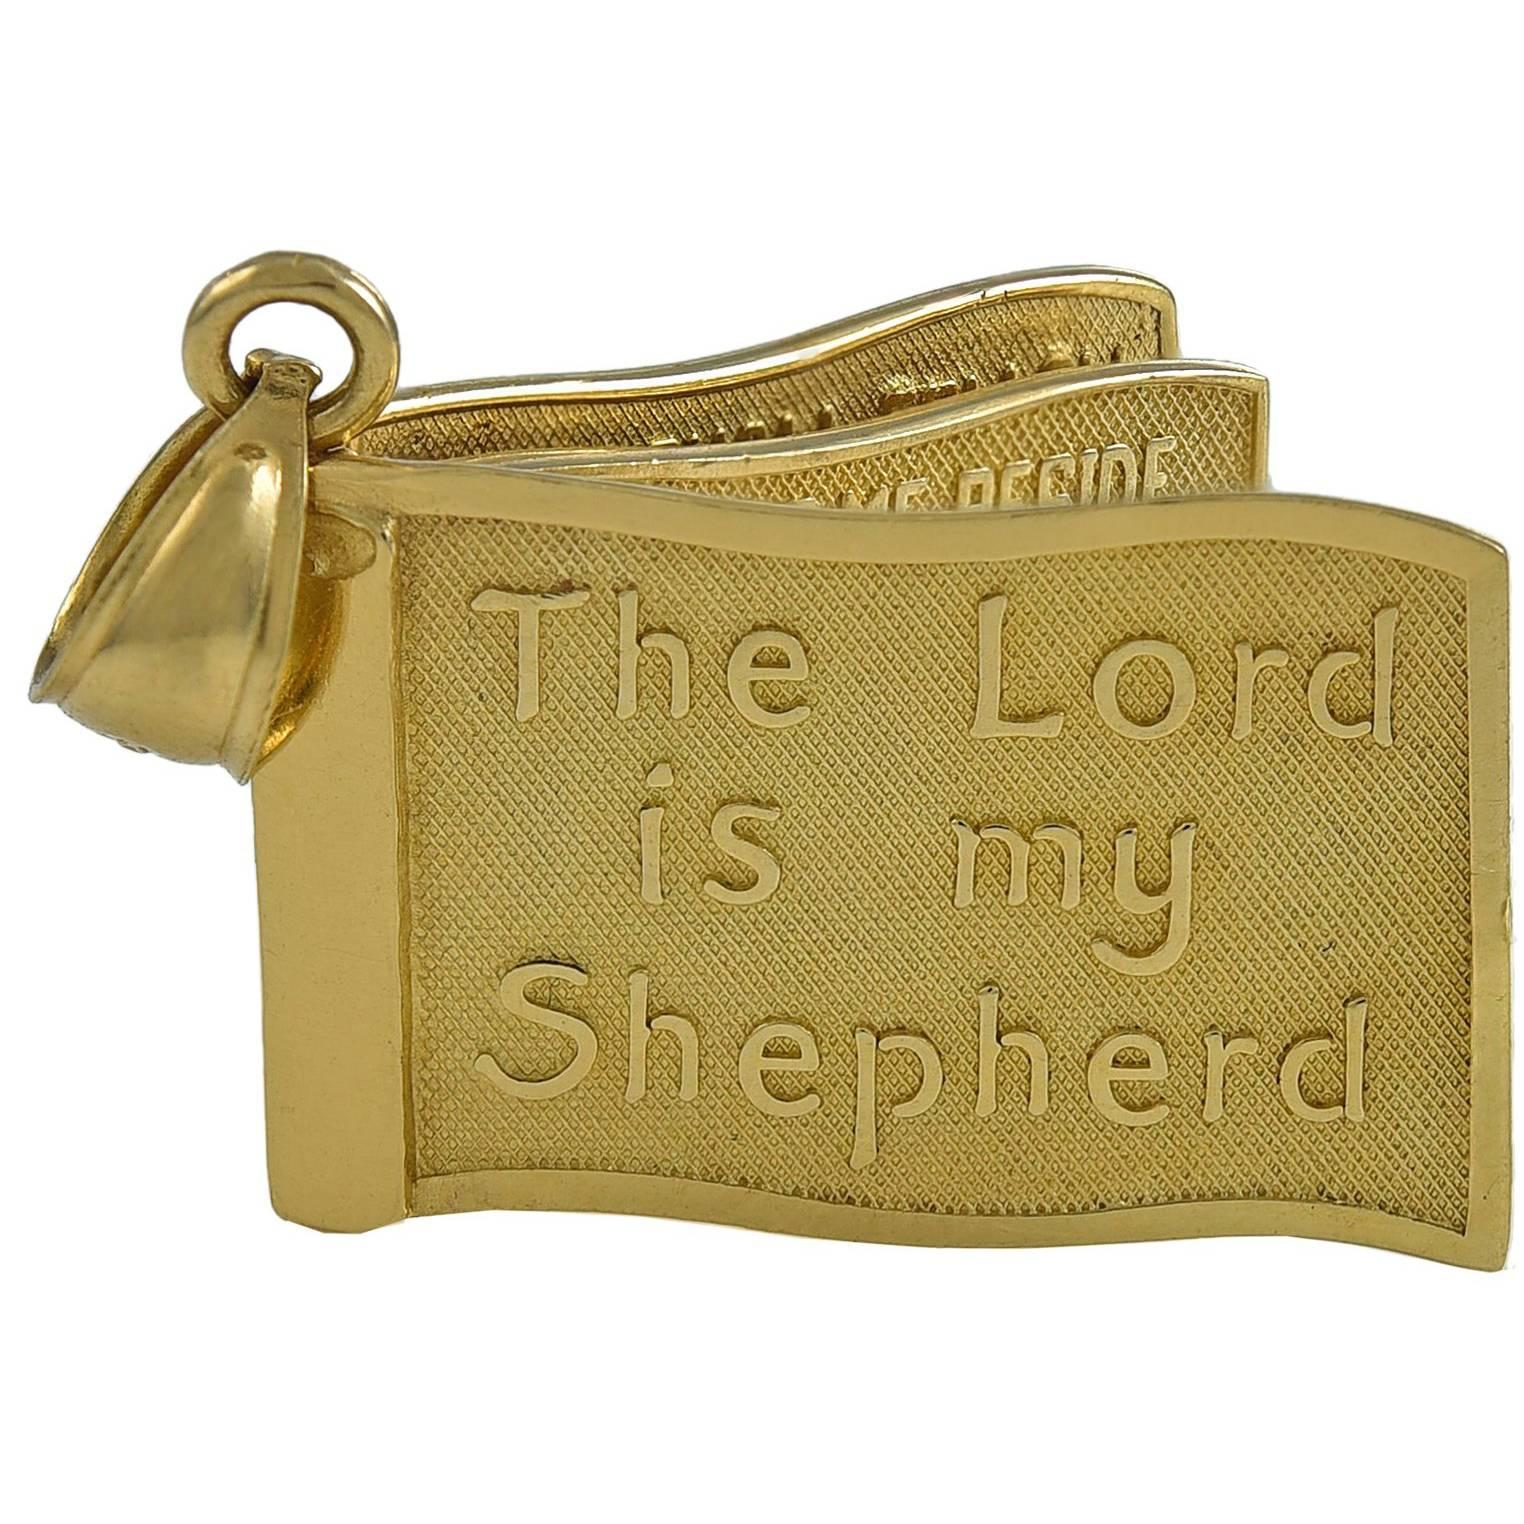 The Lord is my Shepherd Gold Charm